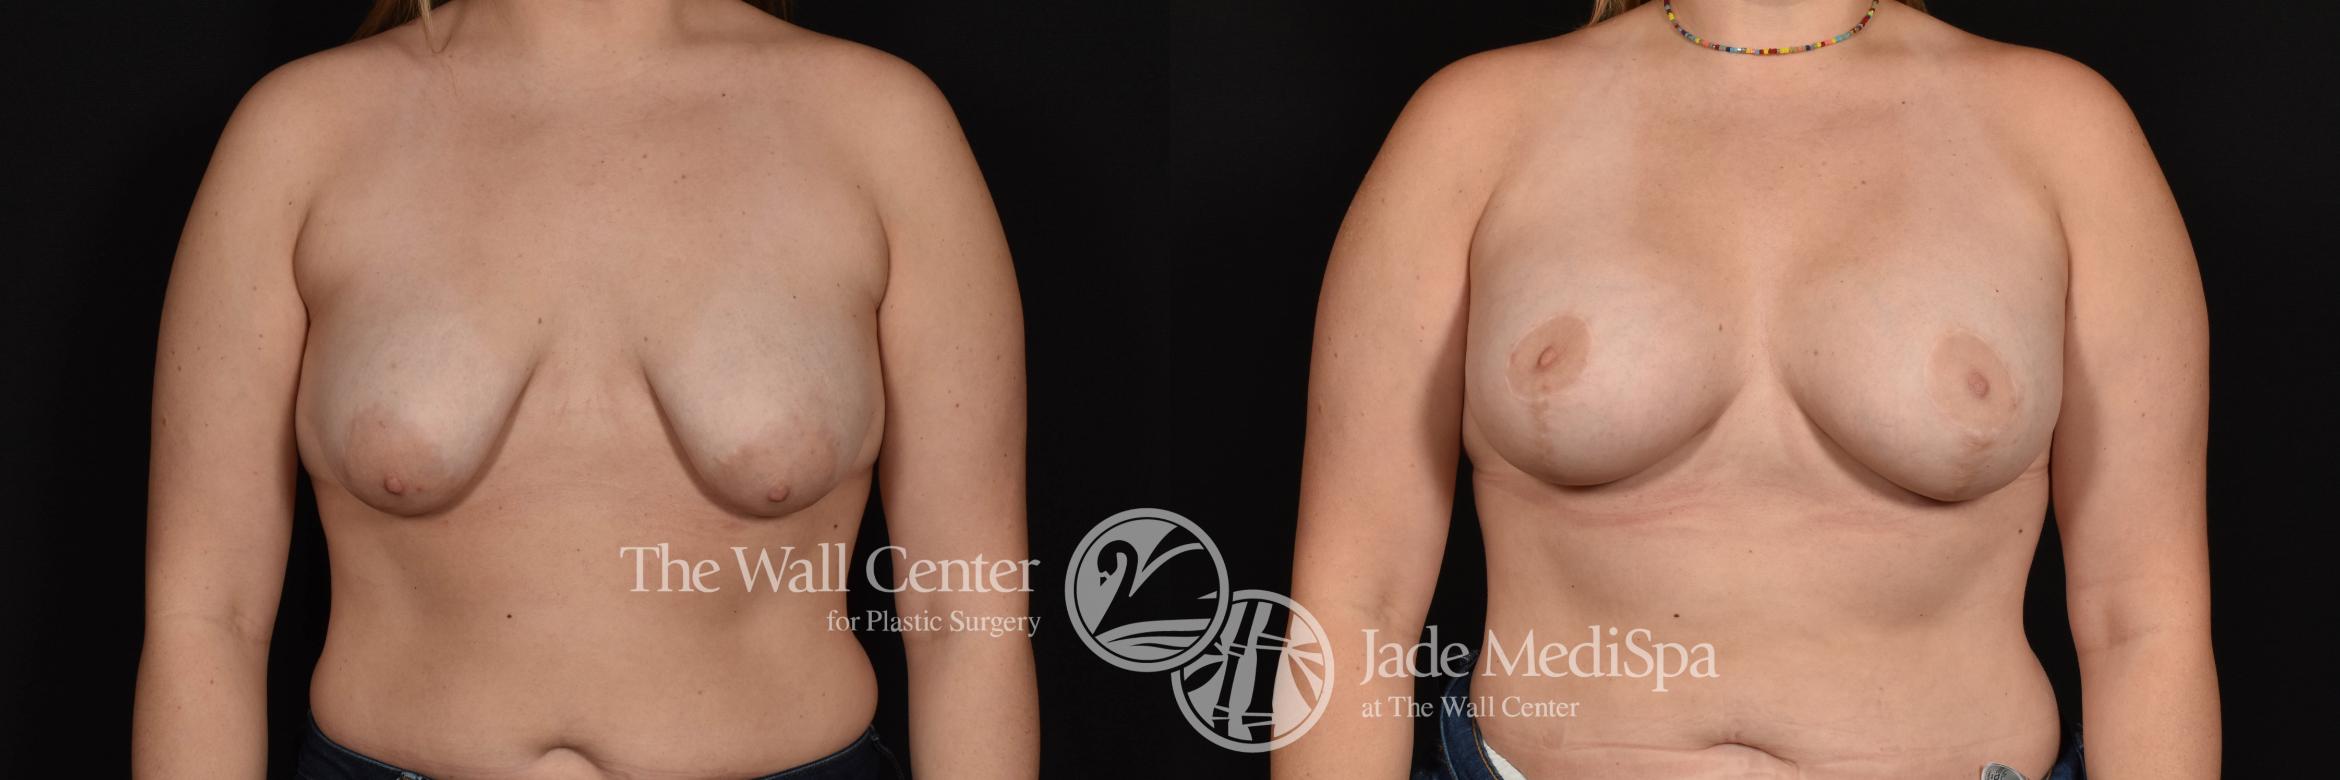 Breast Aug with Lift Front Photo, Shreveport, Louisiana, The Wall Center for Plastic Surgery, Case 933